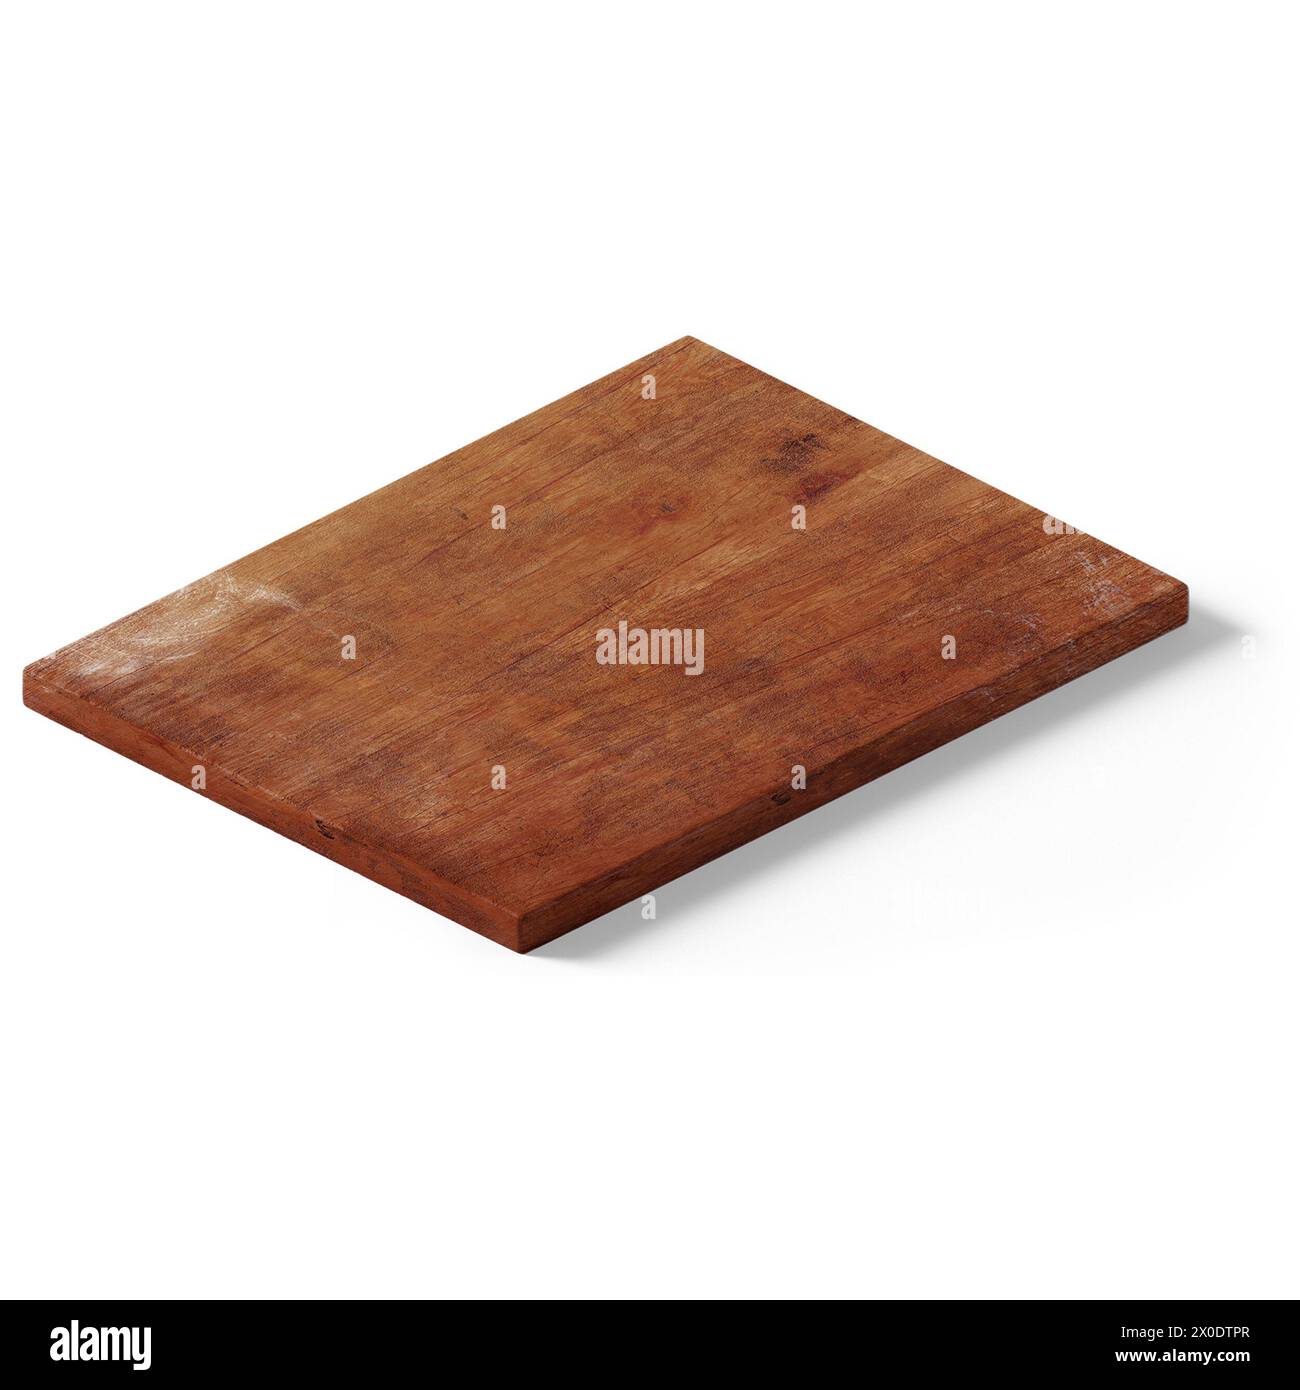 Creative concept isometric wooden block isolated against plain background , suitable for your asset elements. Stock Photo